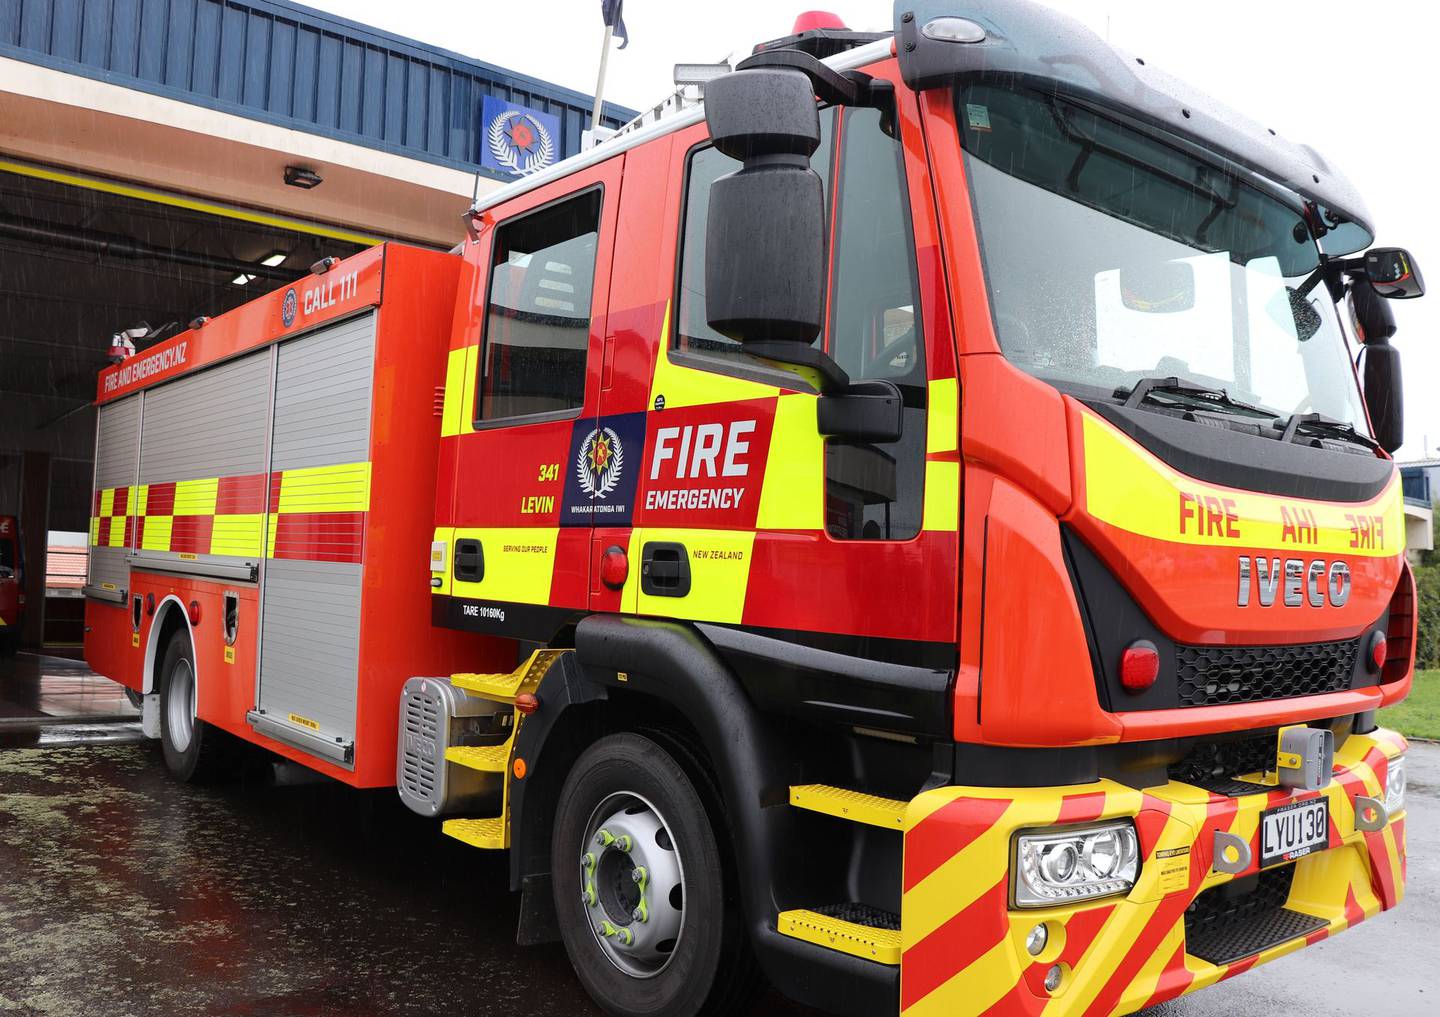 Brand new fire engine for Levin needs more firefighters - NZ Herald